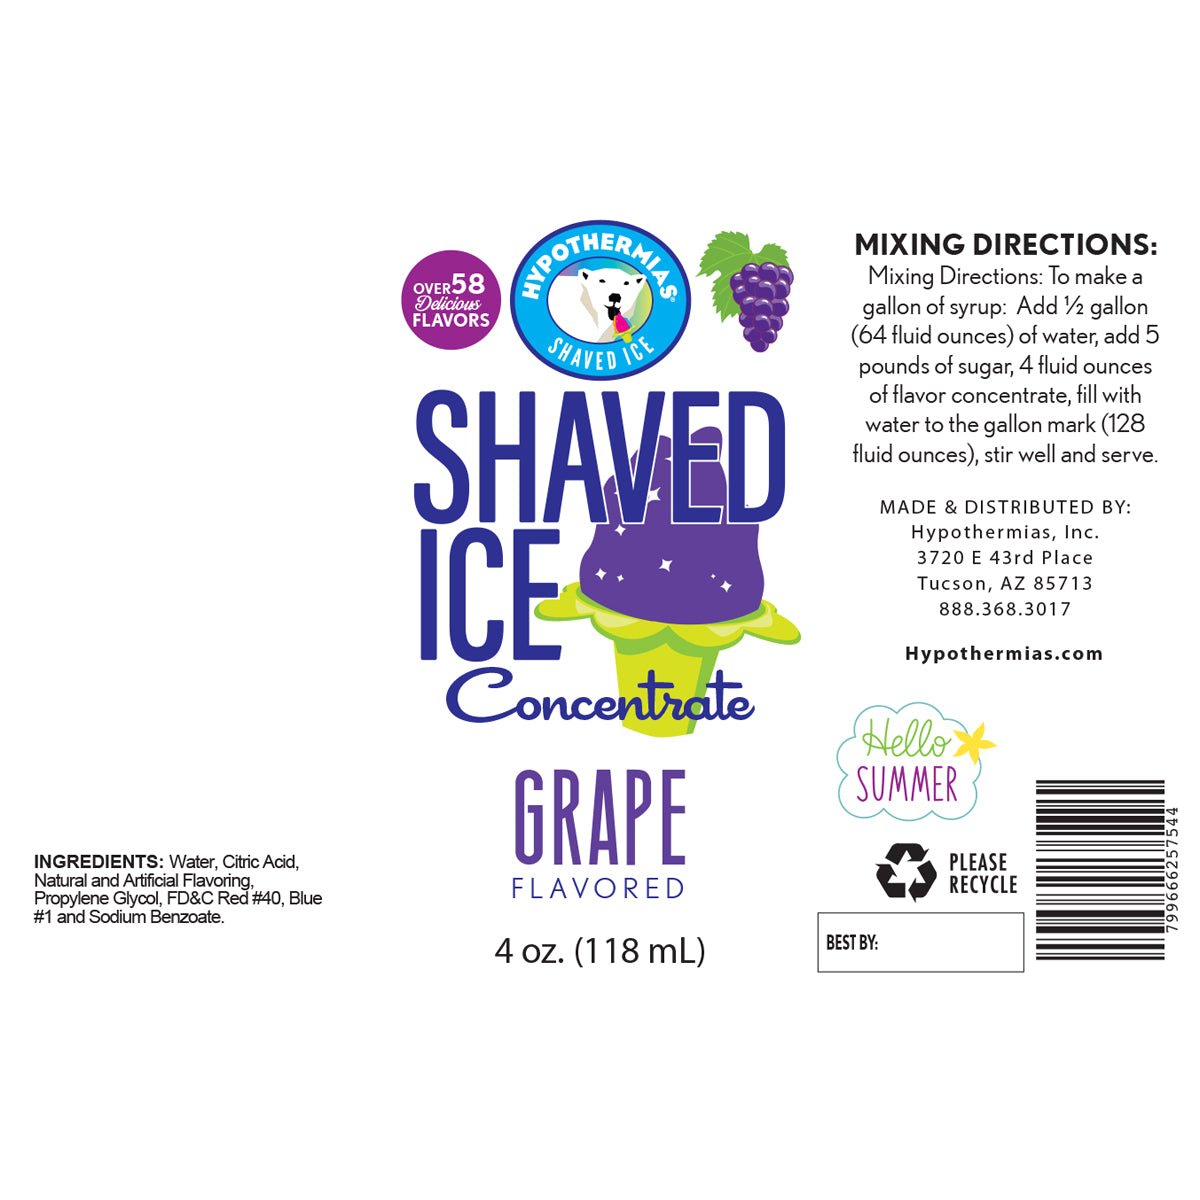 Hypothermias grape shaved ice or snow cone flavor syrup concentrate ingredient label.